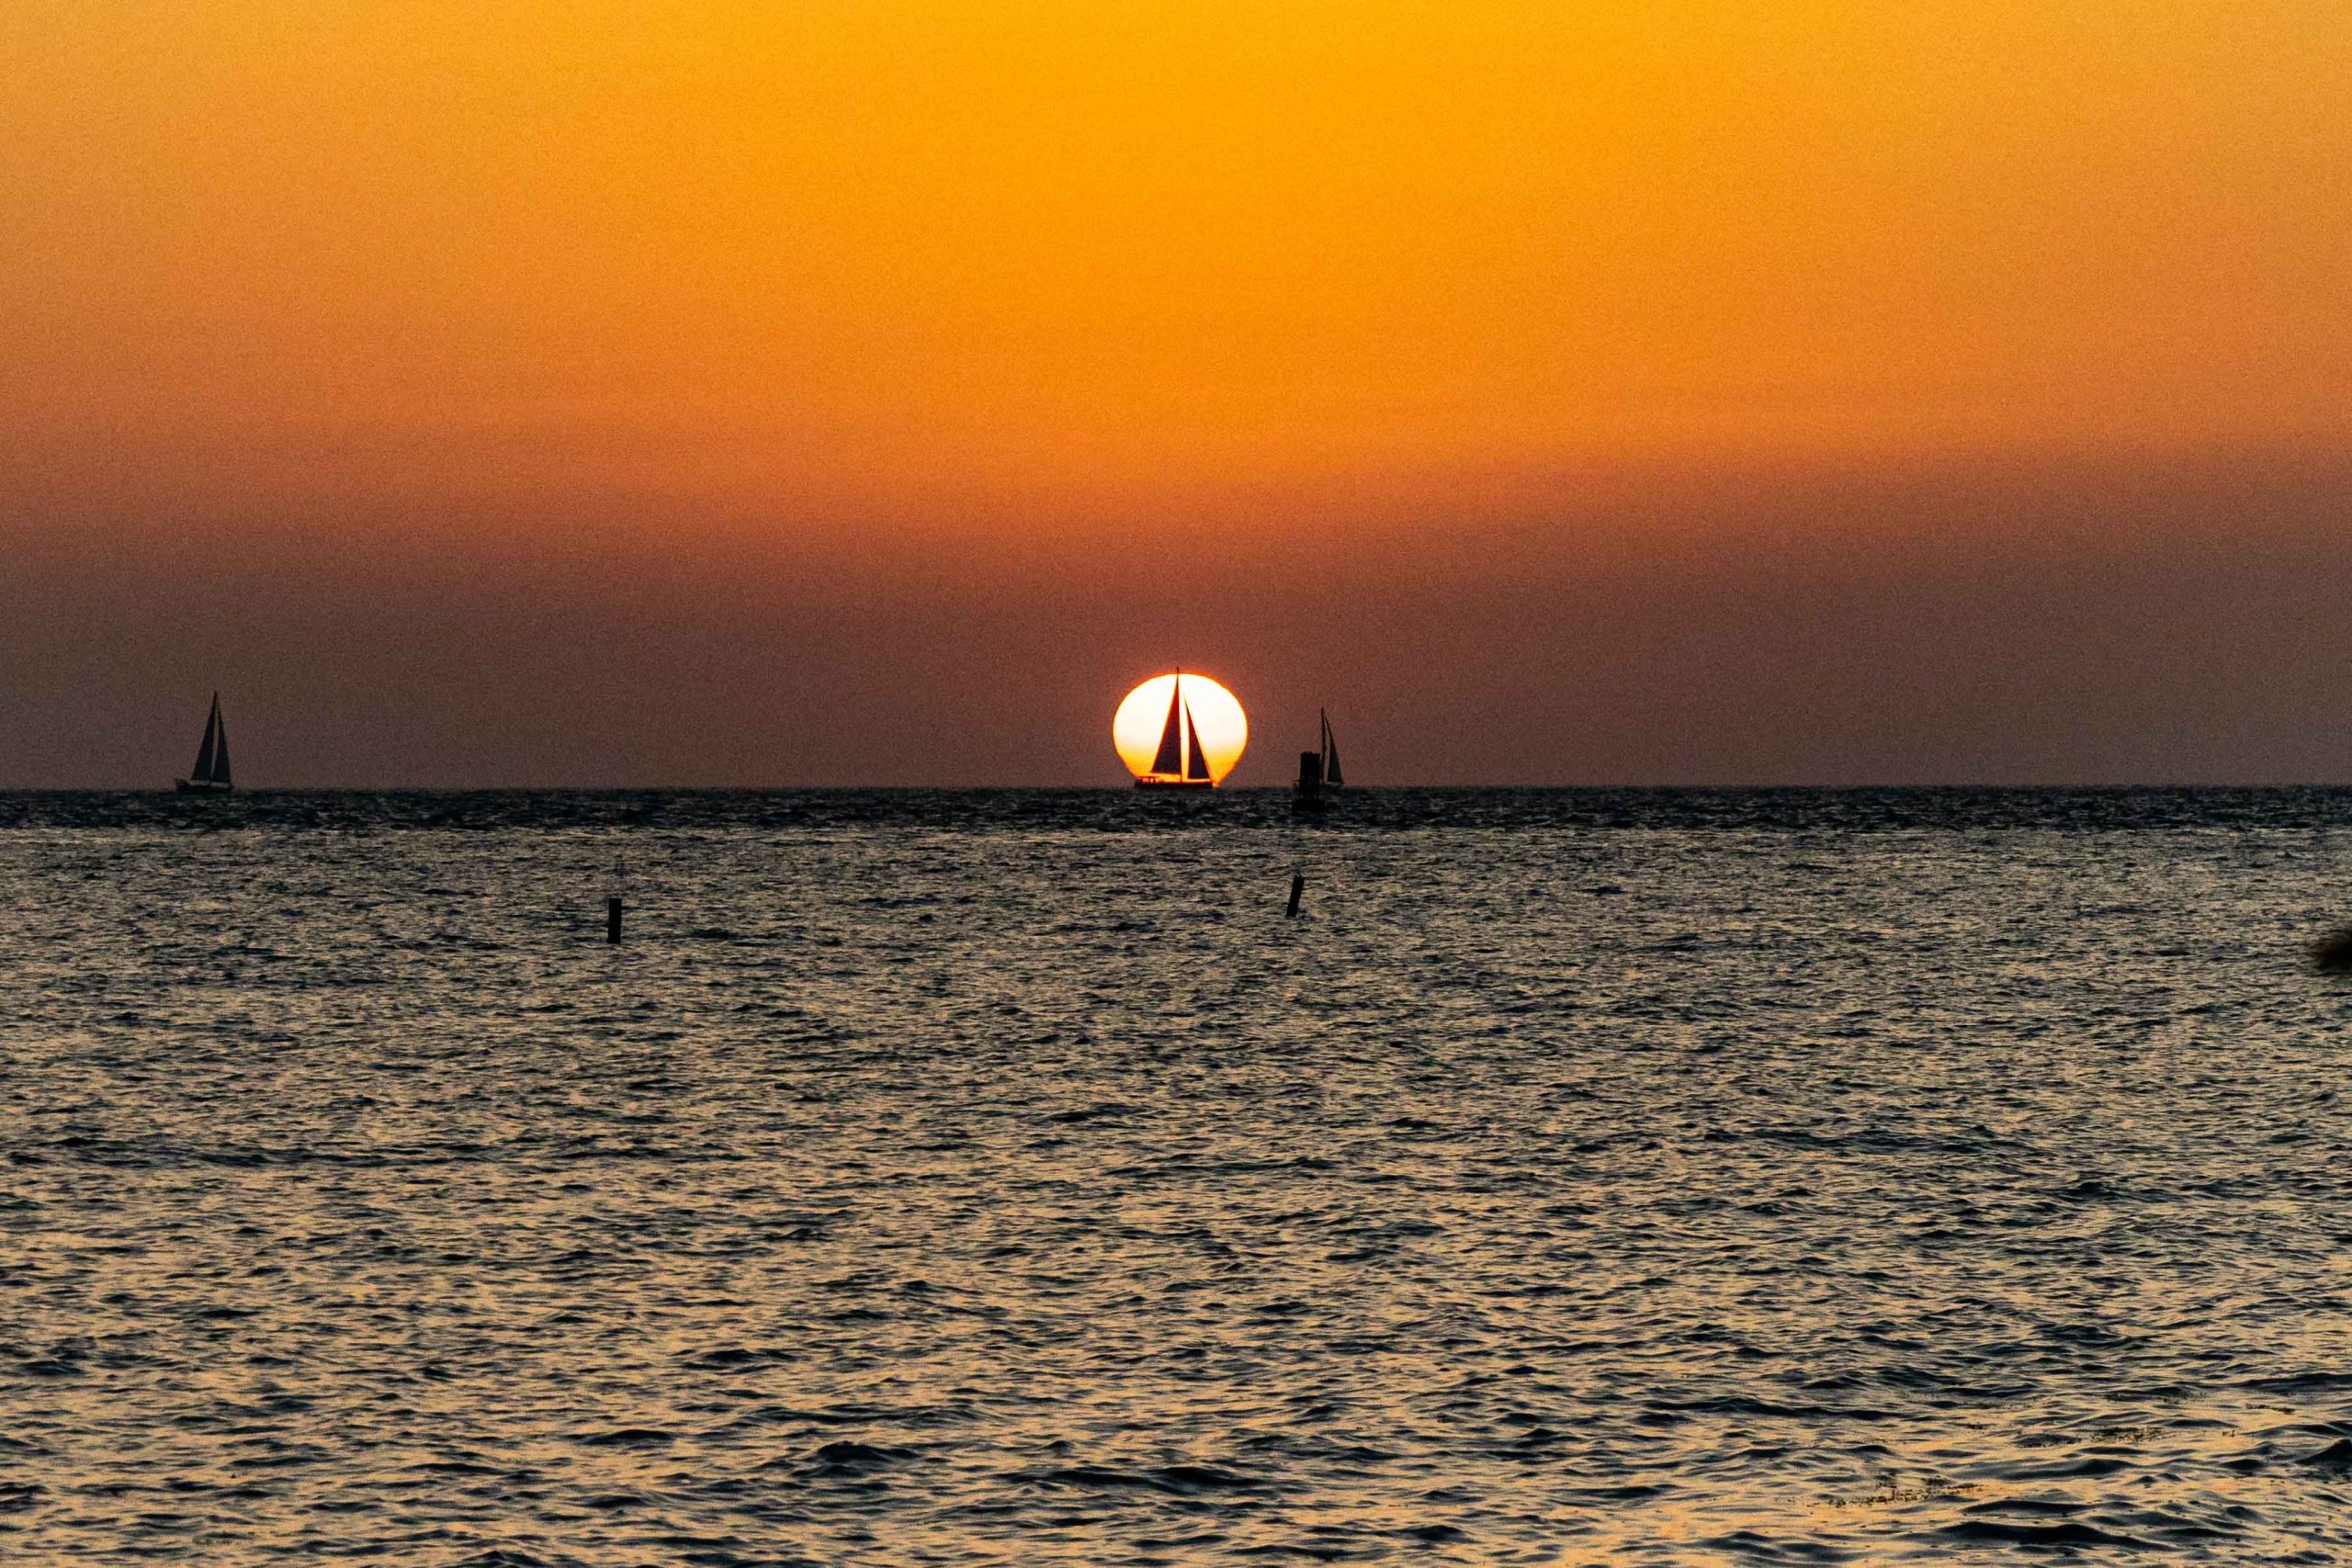 The sun sets over the ocean silhouetting a sailboat on the horizon in the Florida Keys.